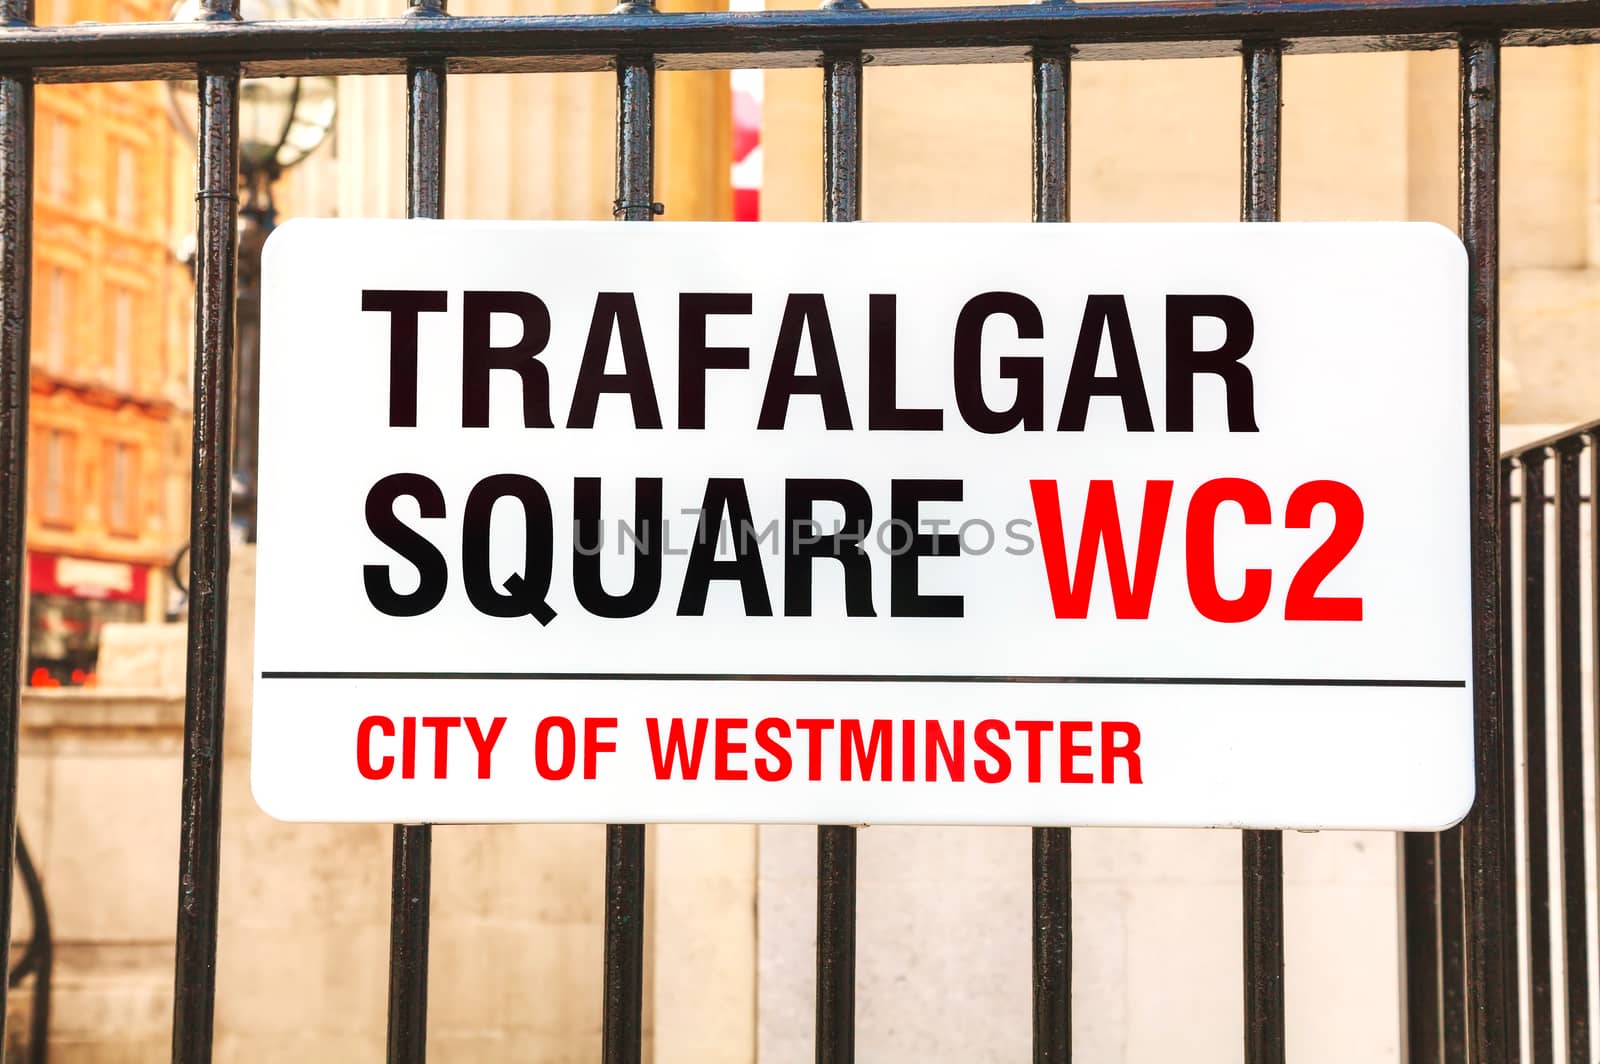 Trafalgar Square sign in city of Westminster by AndreyKr